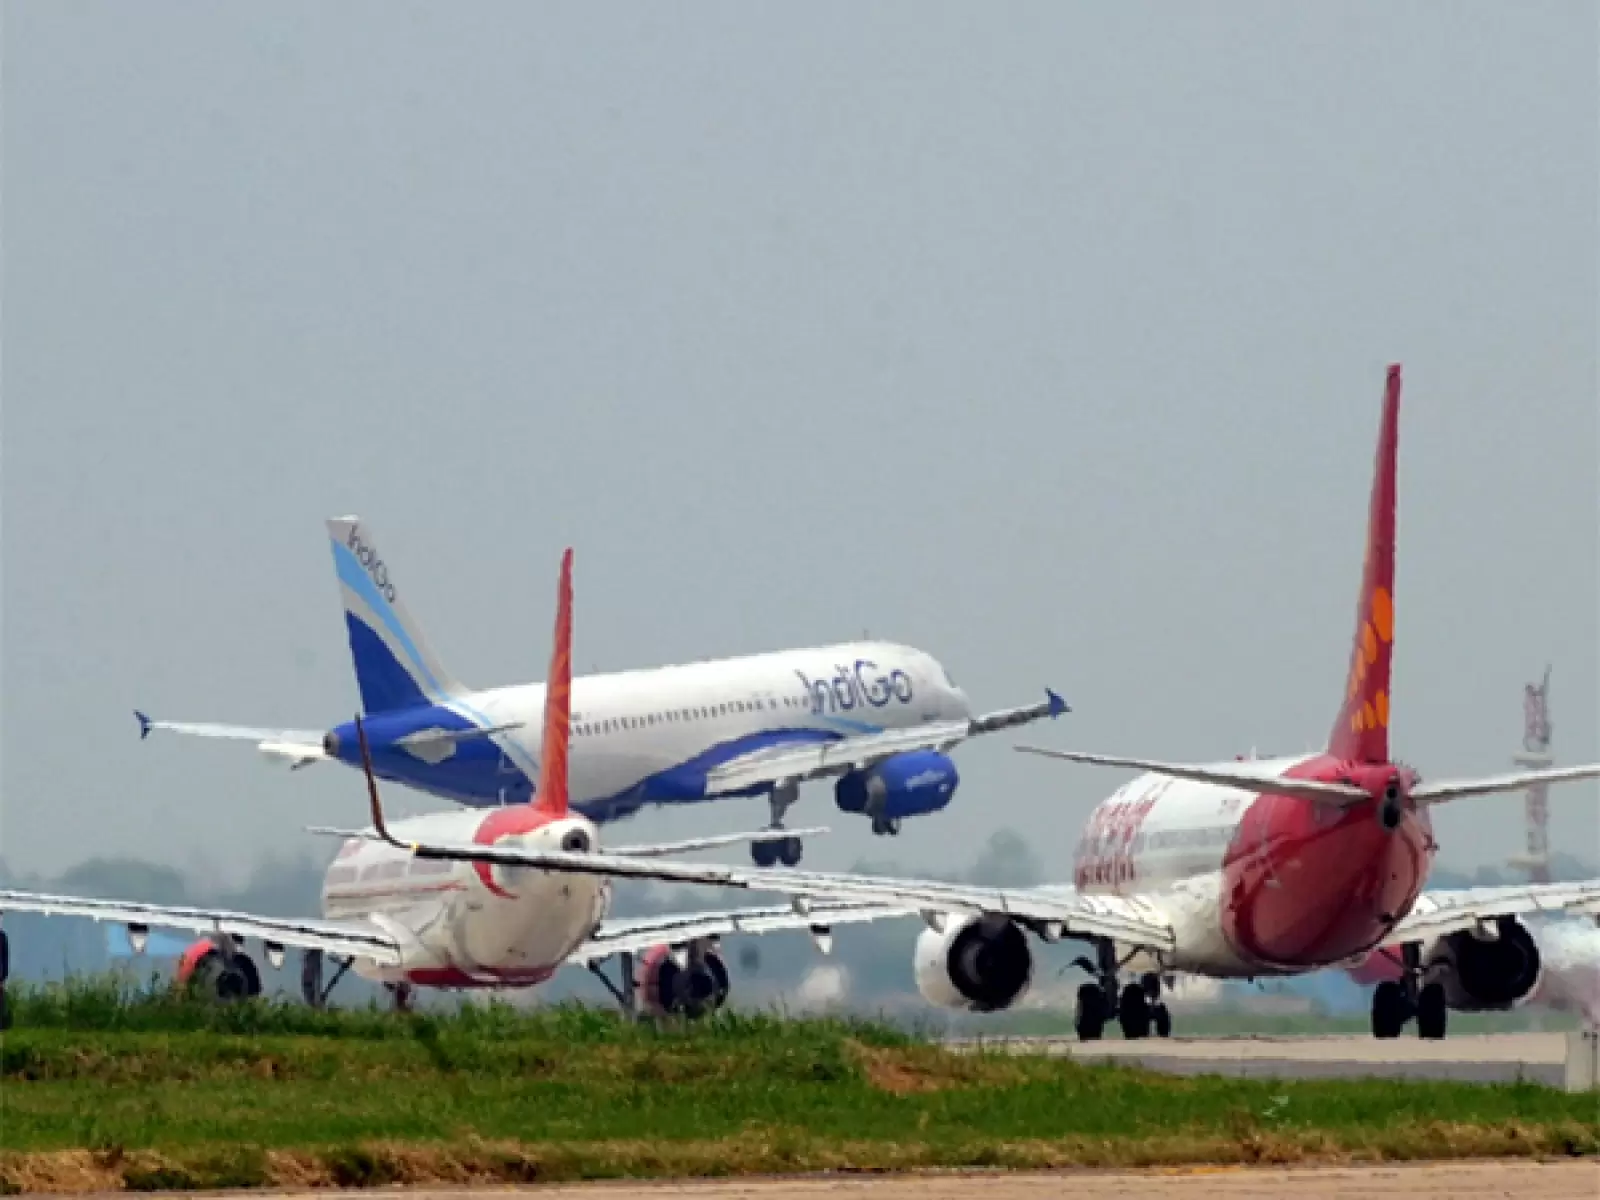 Accident averted at Delhi airport, IndiGo plane crossed taxiway during landing; Runway blocked for 15 minutes